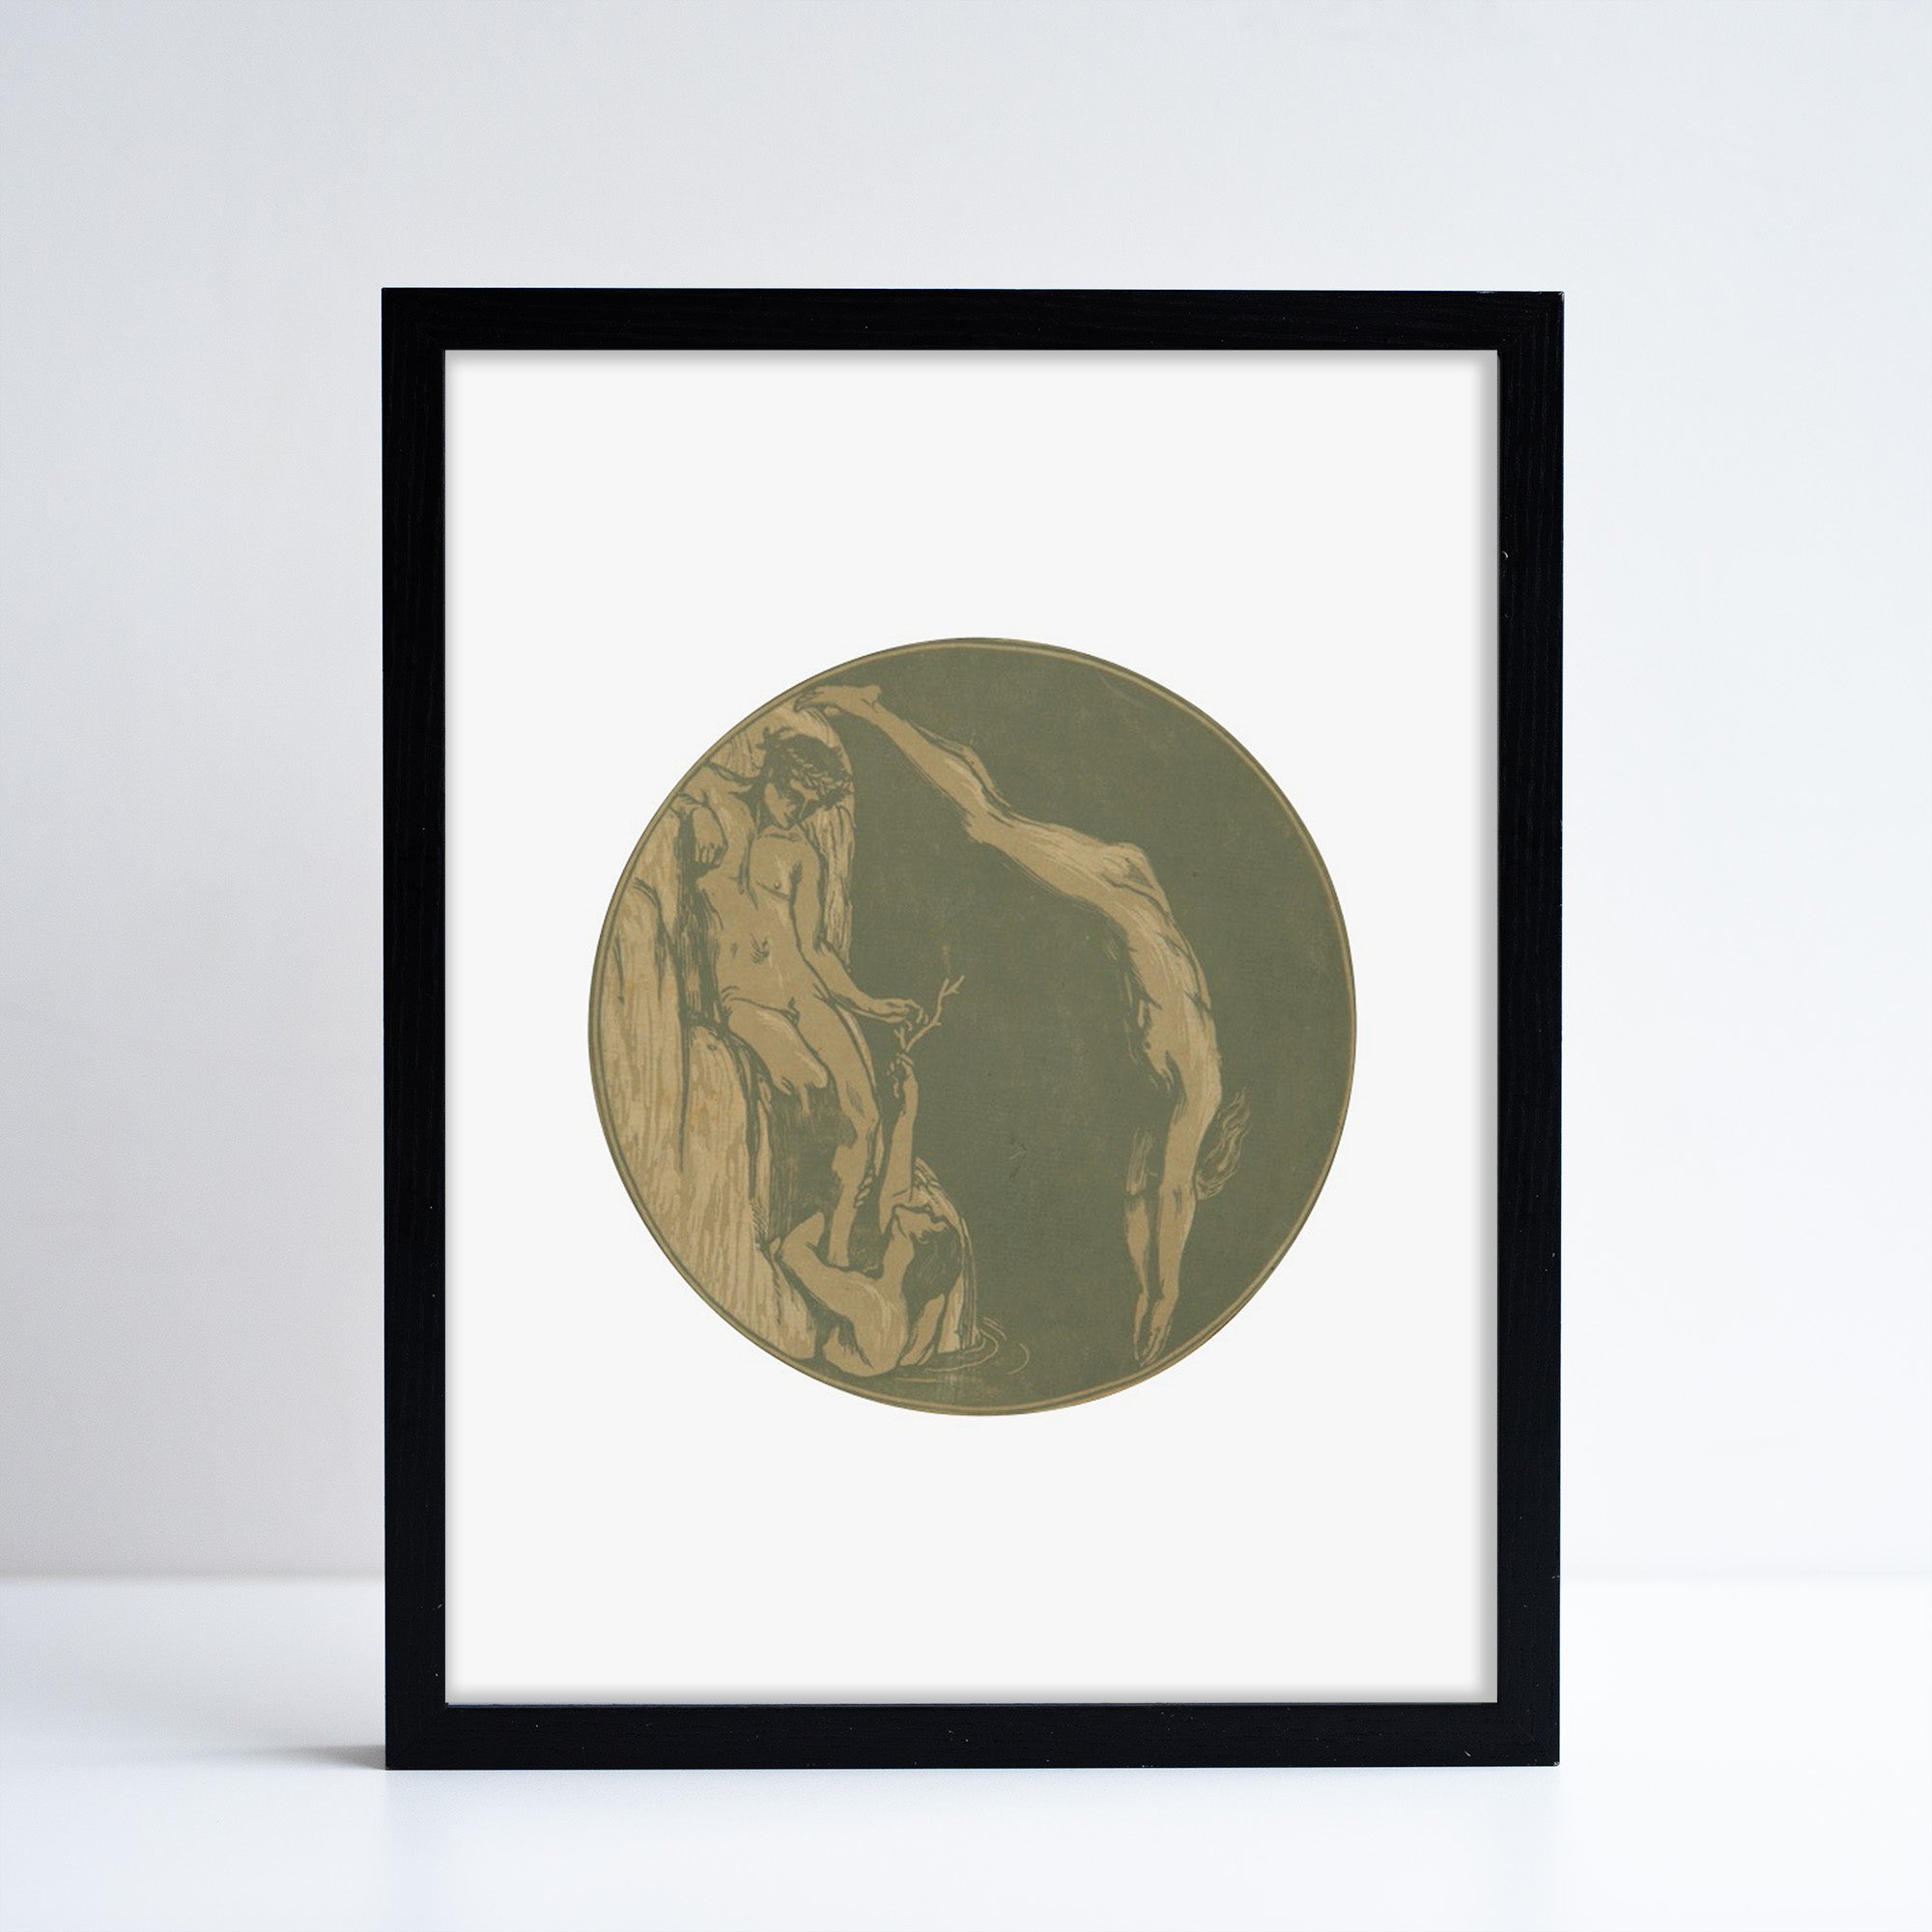 Charles Sherwood Shannon's The Coral Divers mini print in a black frame - white background